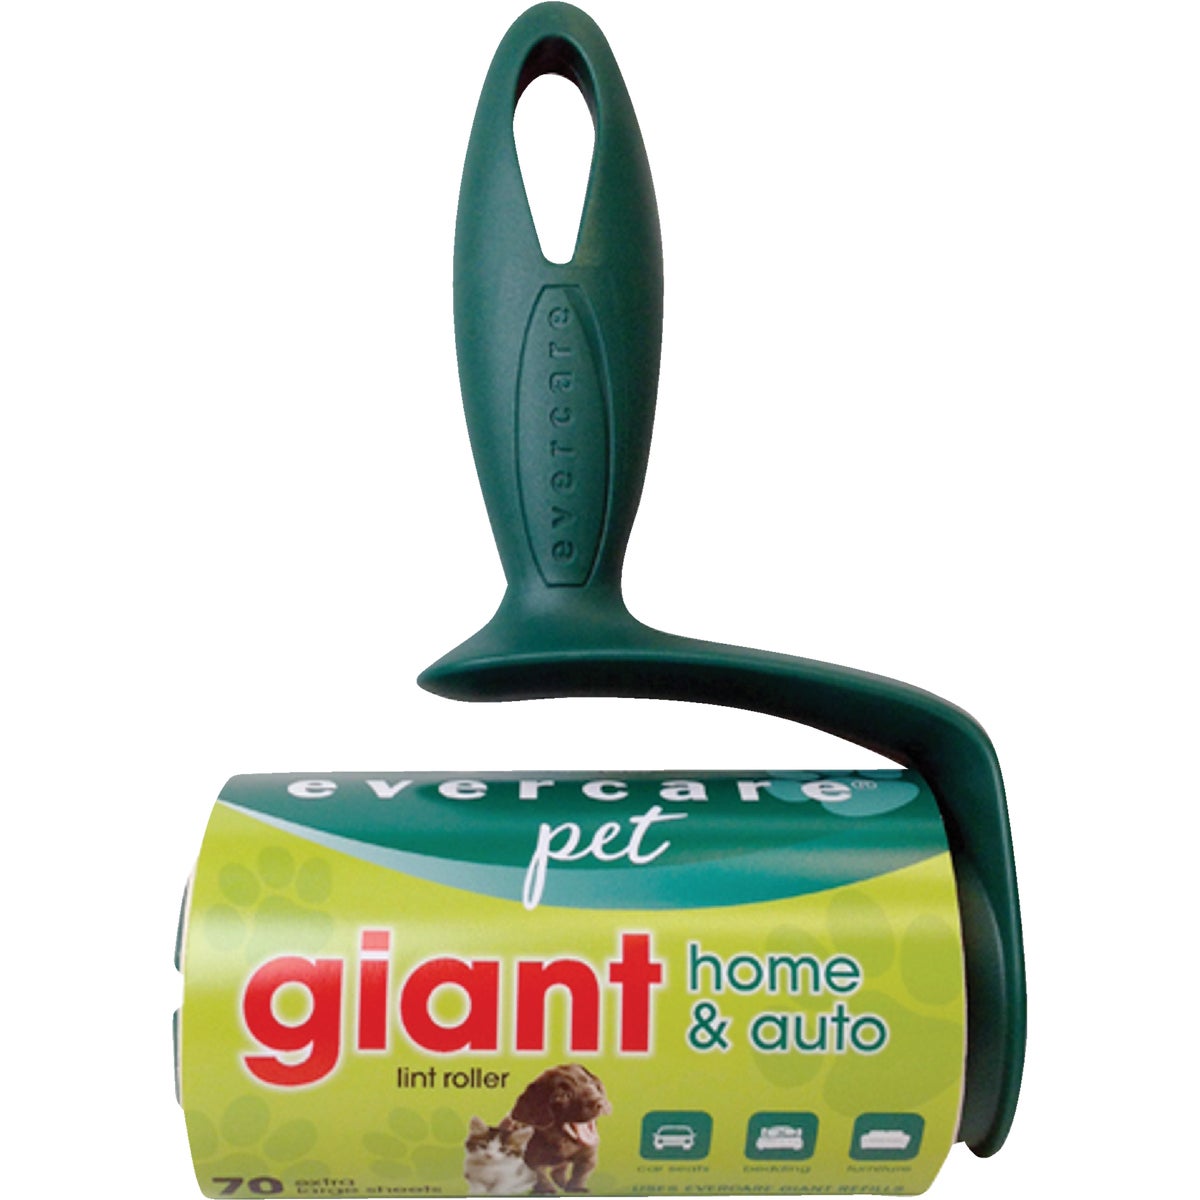 Item 801146, Giant pet hair remover for home and auto.